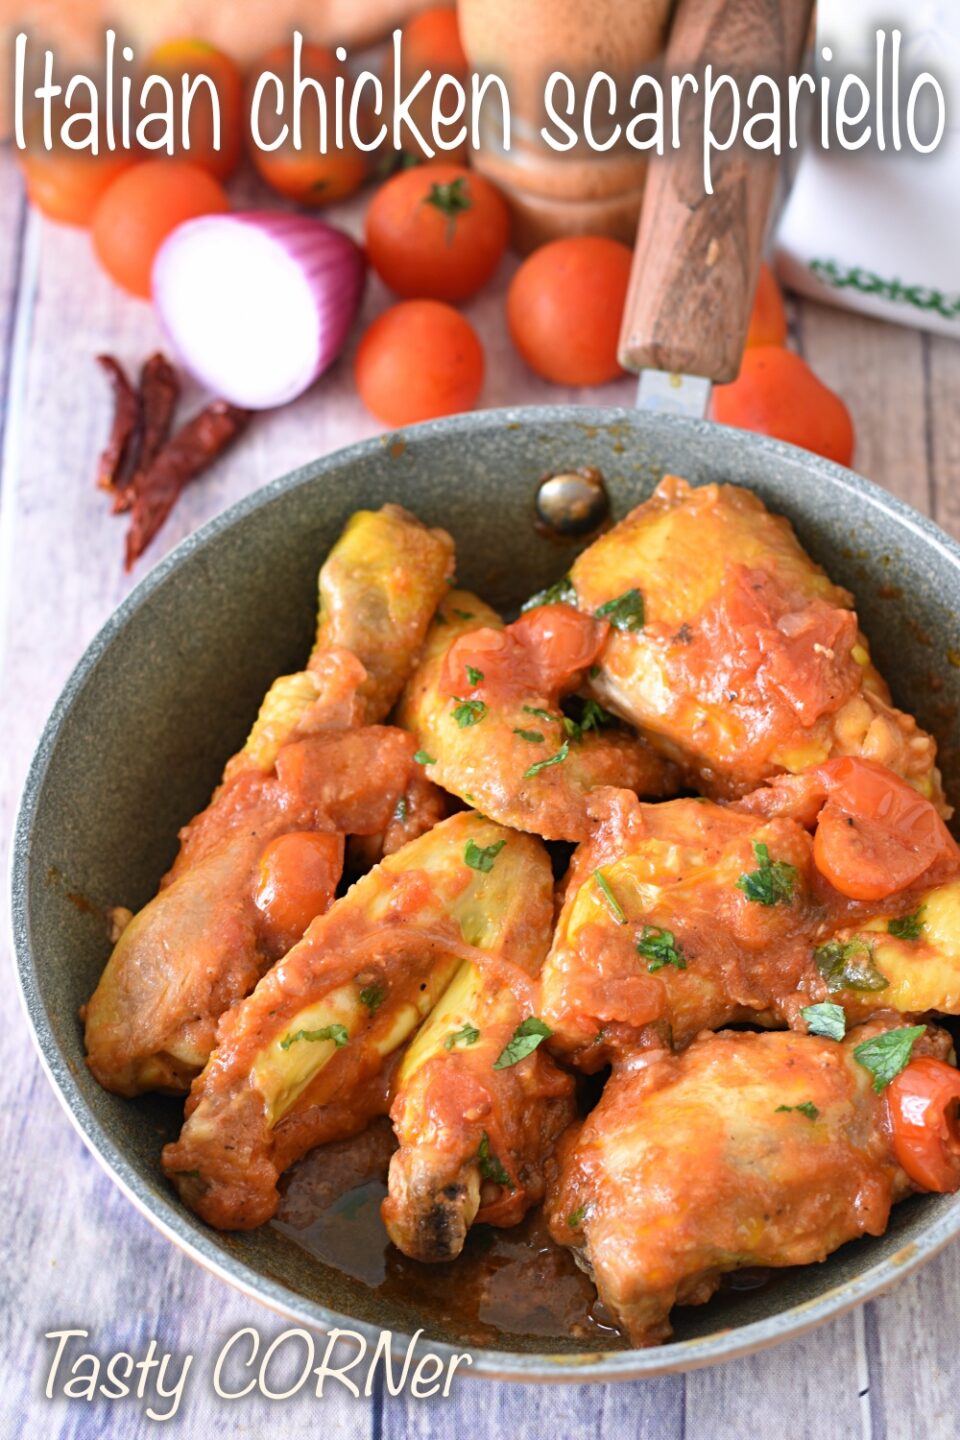 en_v_ authentic Italian chicken scarpariello original recipe without sausages or peppers ancient Neapolitan dish of humble origins by tastycorner